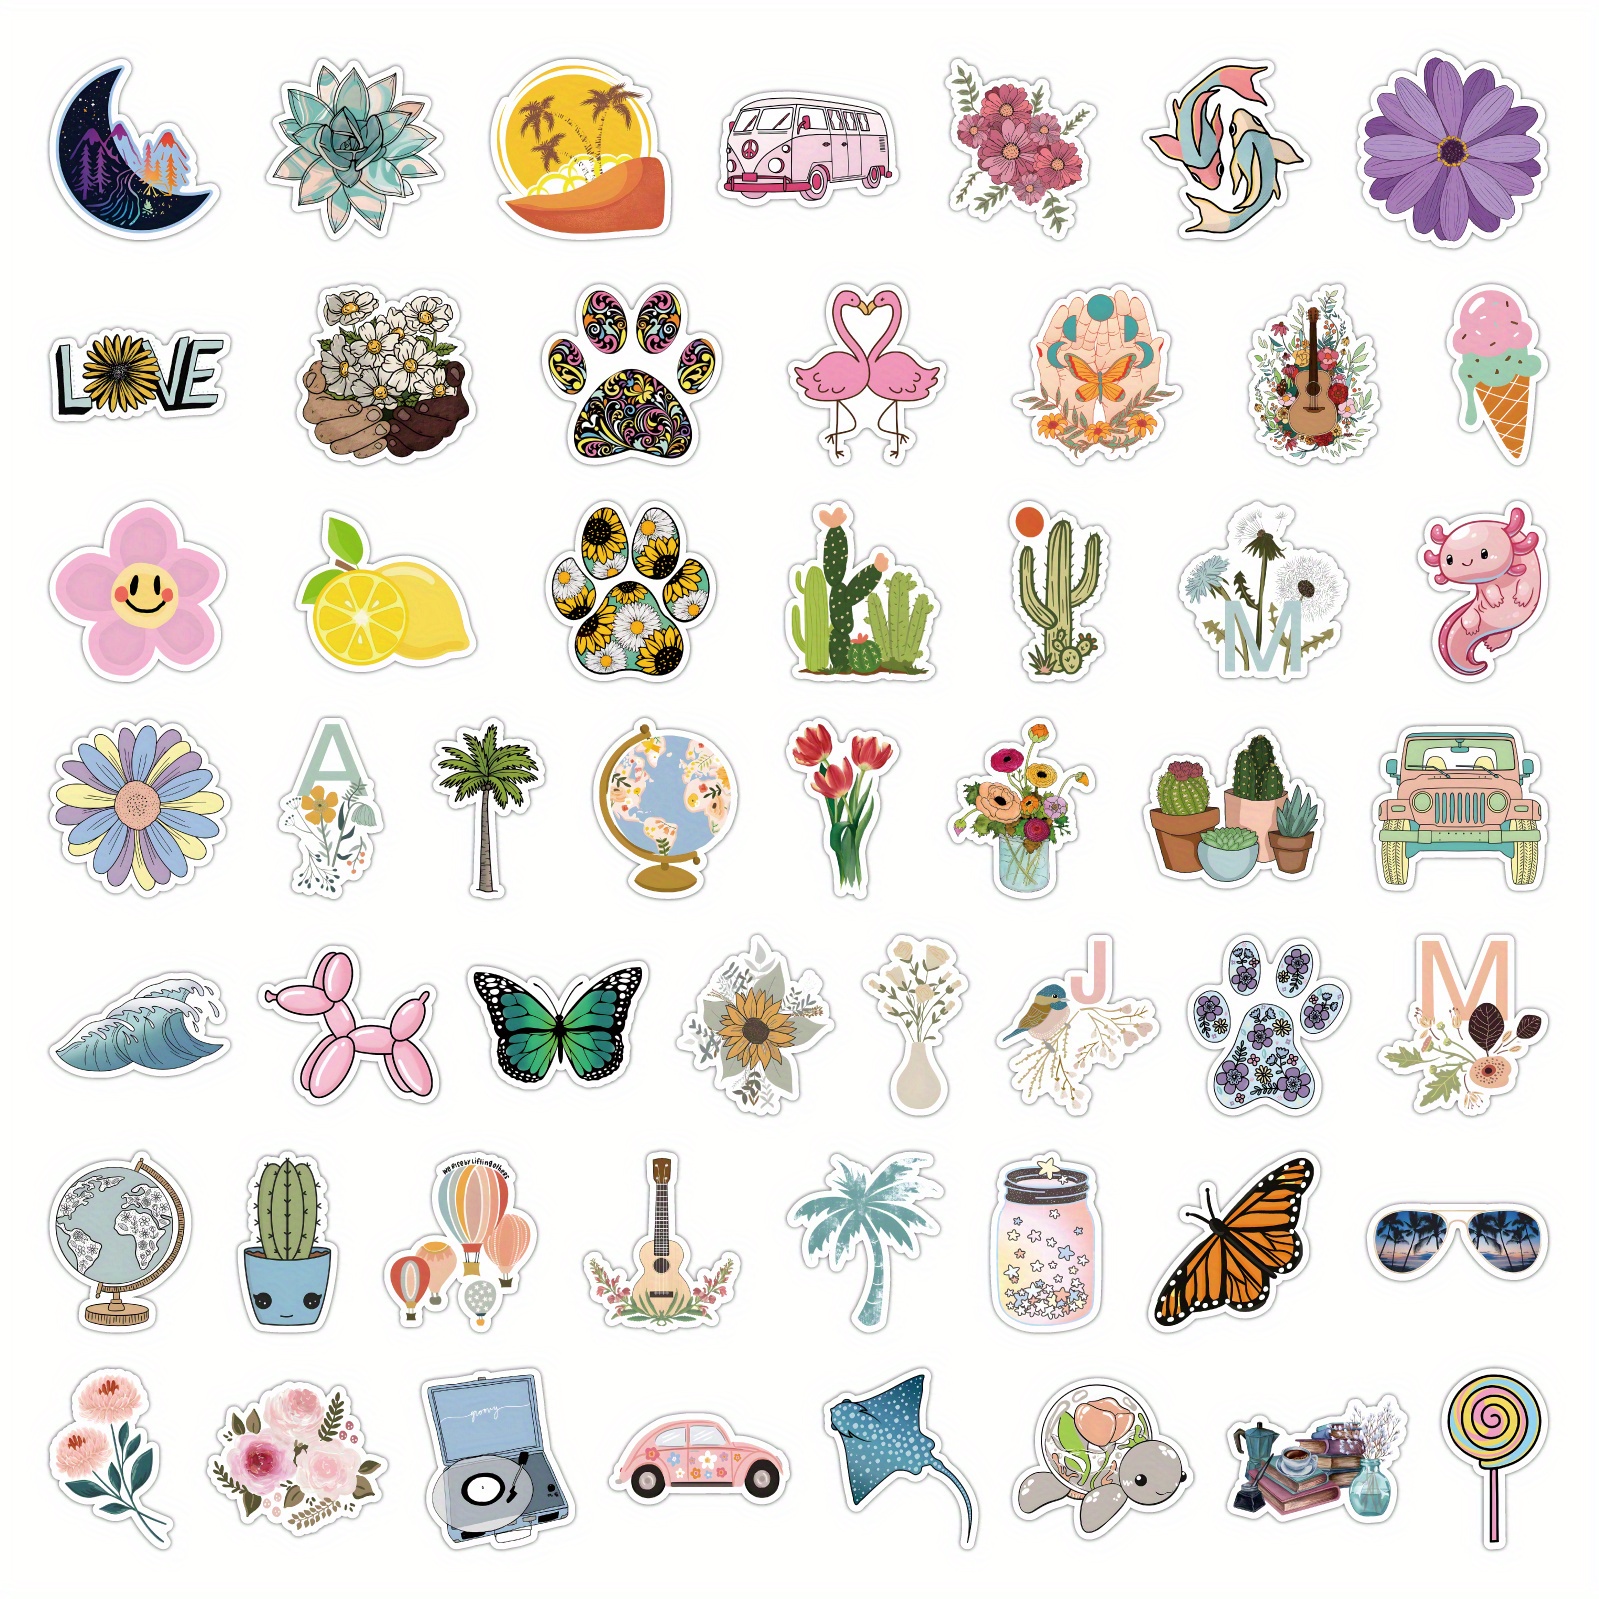  200 PCS Cute Animal Stickers Waterproof Stickers for Colorful  Animal Vinyl Cute Aesthetic Stickers for Water Bottle Laptop Phone  Skateboard Stickers for Teens Girls Kids : Toys & Games